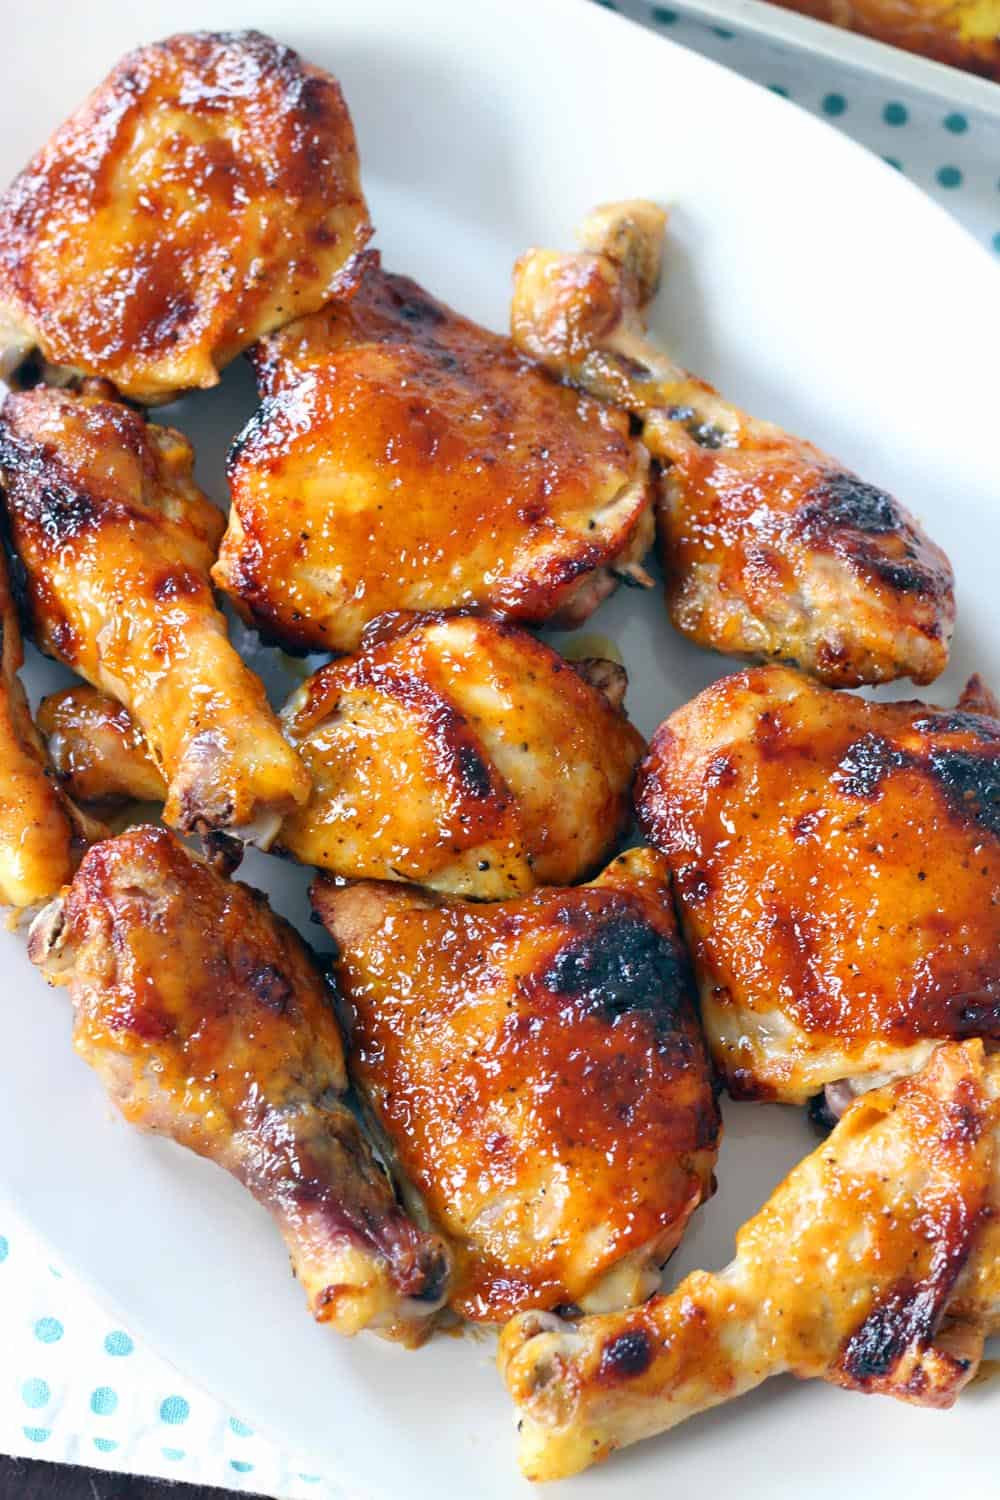 Baked Bbq Chicken Recipe
 Two Ingre nt Crispy Oven Baked BBQ Chicken